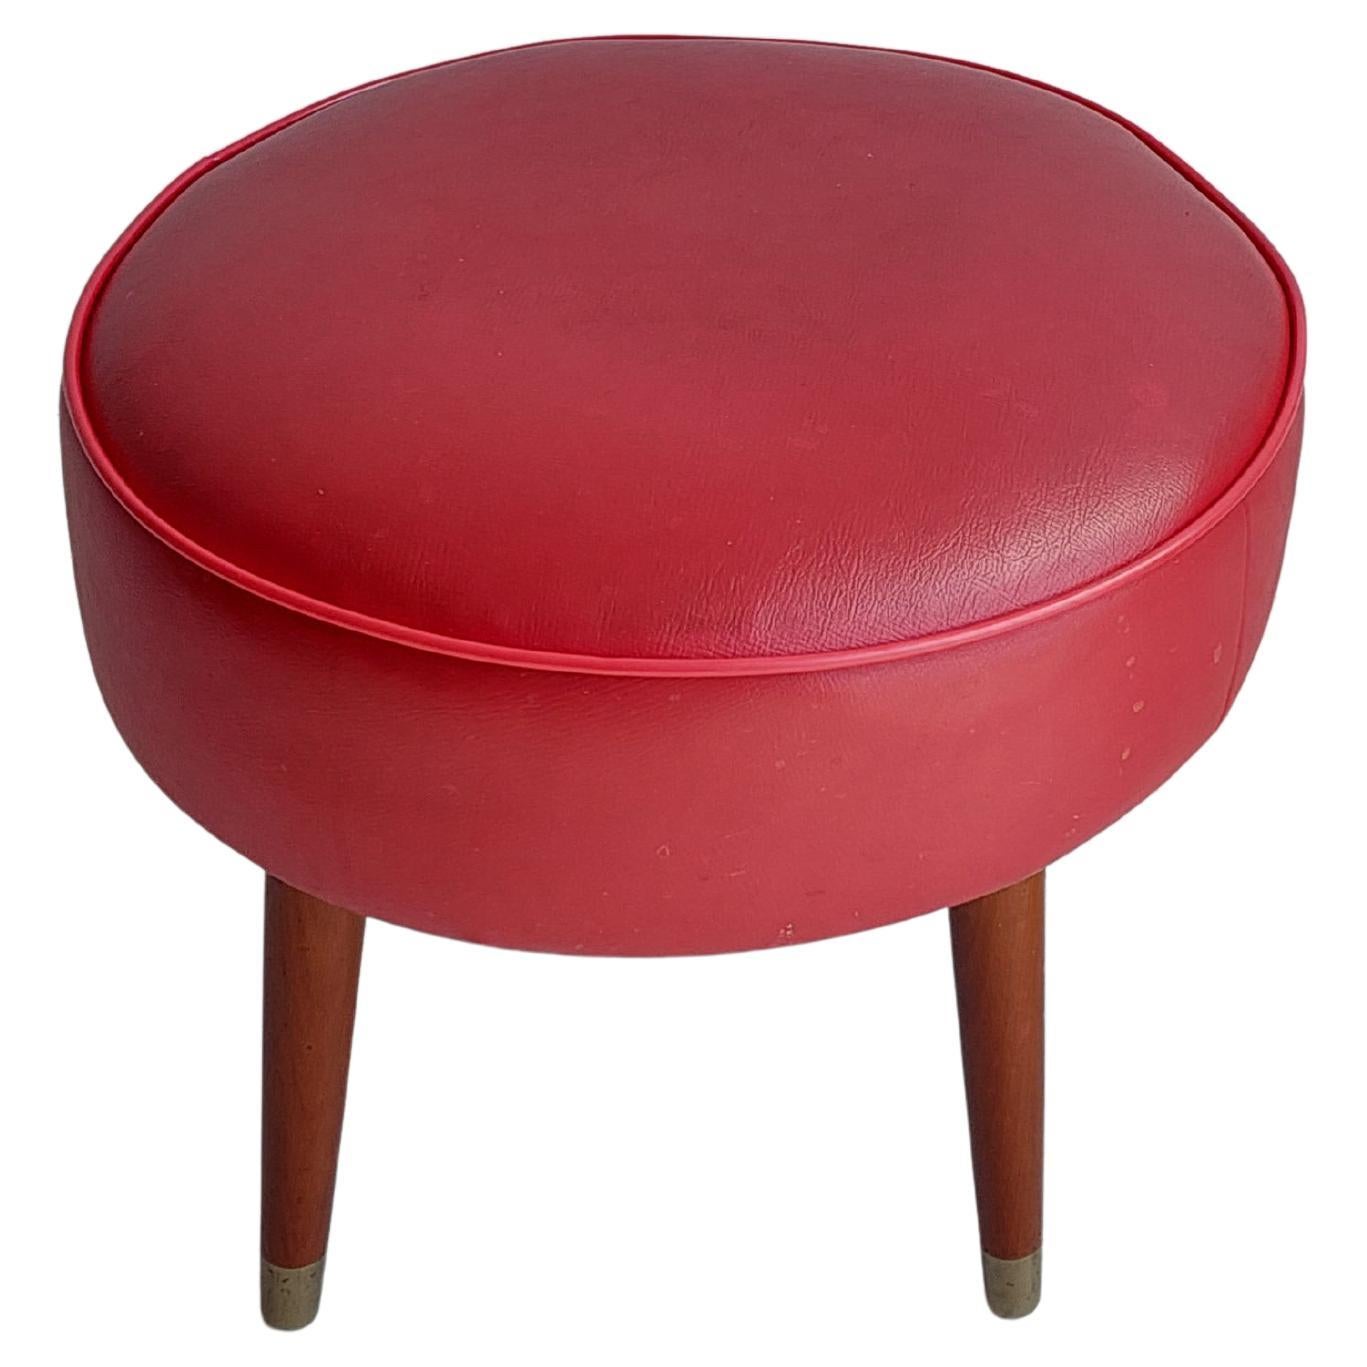 Miss Muffet foot stool in original red vinyl, on wooden legs.
Vintage Footstool, 1950's Original Upholstery, Mid-Century Modern stool.
This is an original vintage (mid 20th century) round foot stool with medium/dark red vinyl upholstery on top and